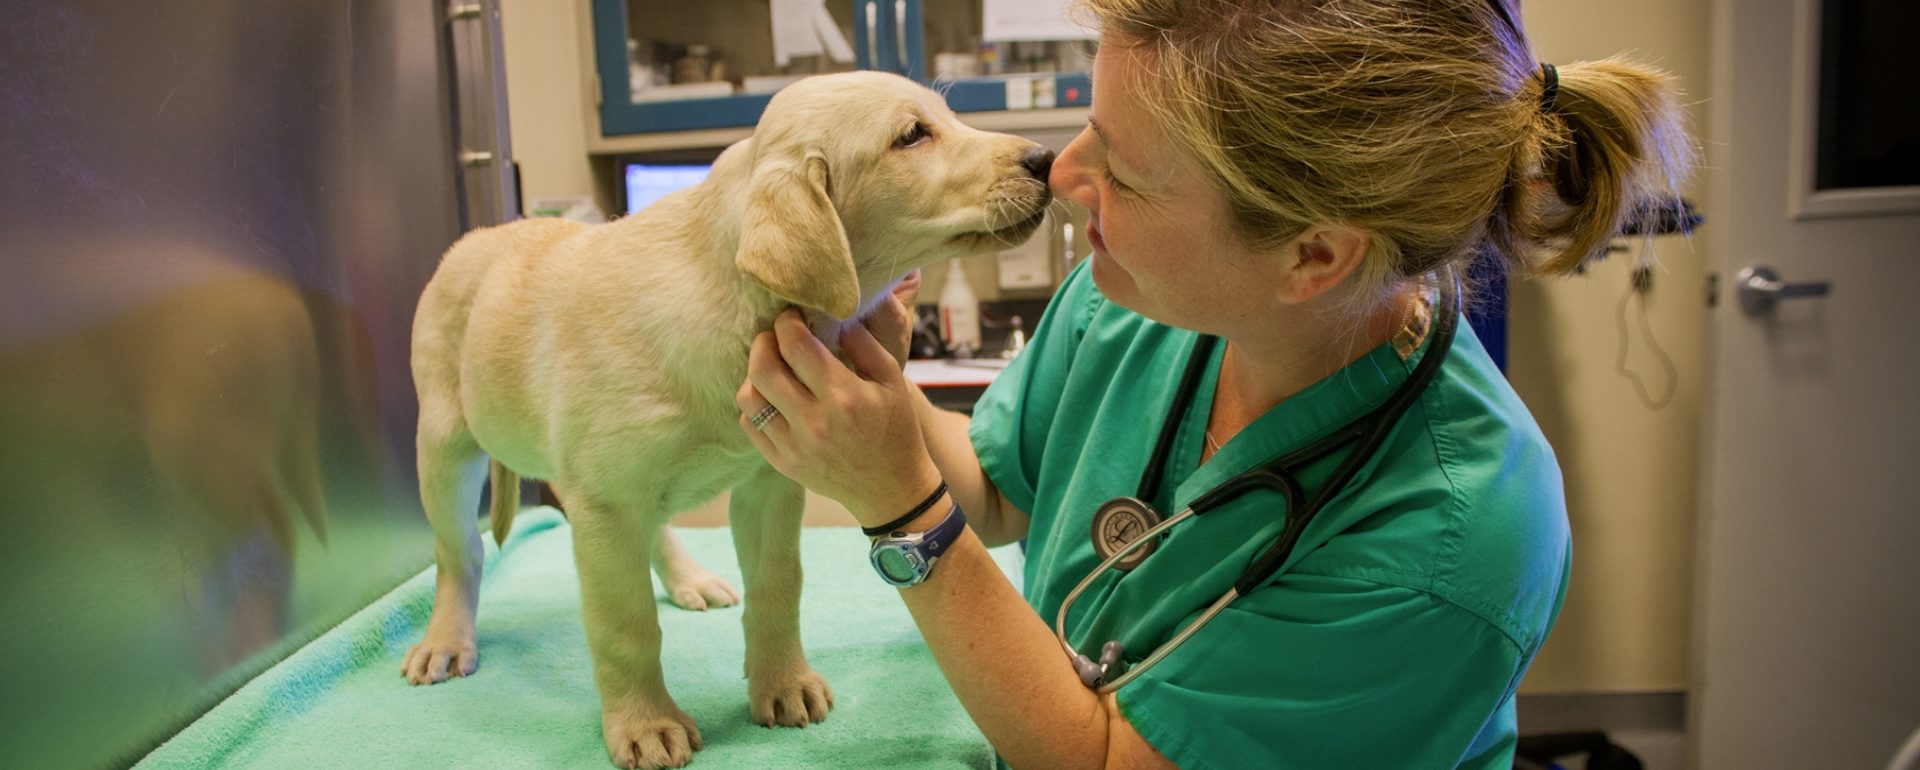 A GDB veterinarian nose-to-nose with a tiny yellow Lab puppy in a veterinary clinic exam room.